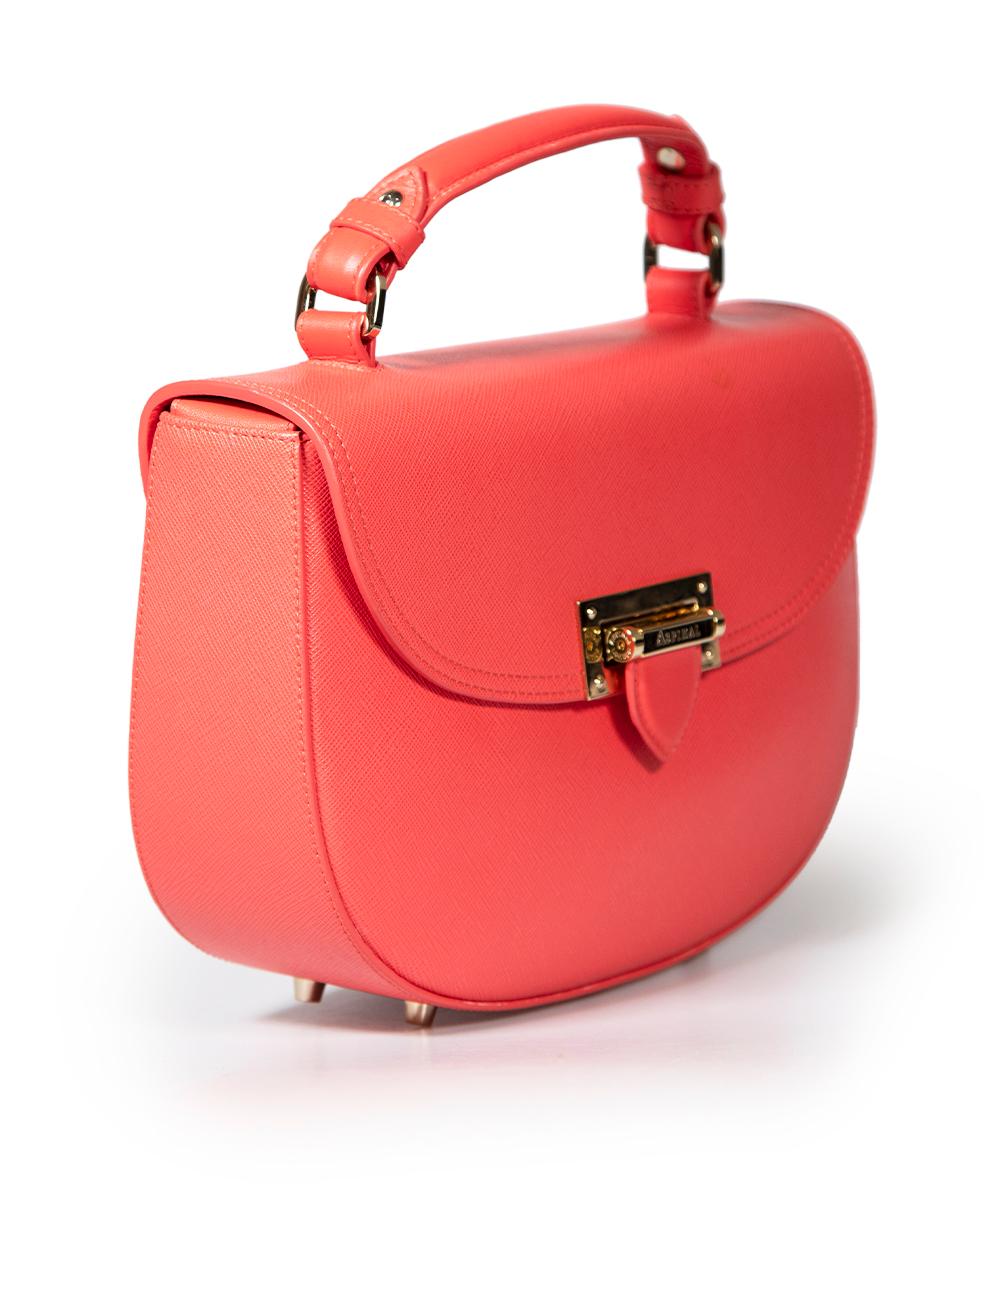 CONDITION is Very good. Minimal wear to bag is evident. Minimal wear to the front with a small mark to the flap on this used Aspinal of London designer resale item. This item comes with original dust bag.
 
 
 
 Details
 
 
 Portobello
 
 Coral
 
